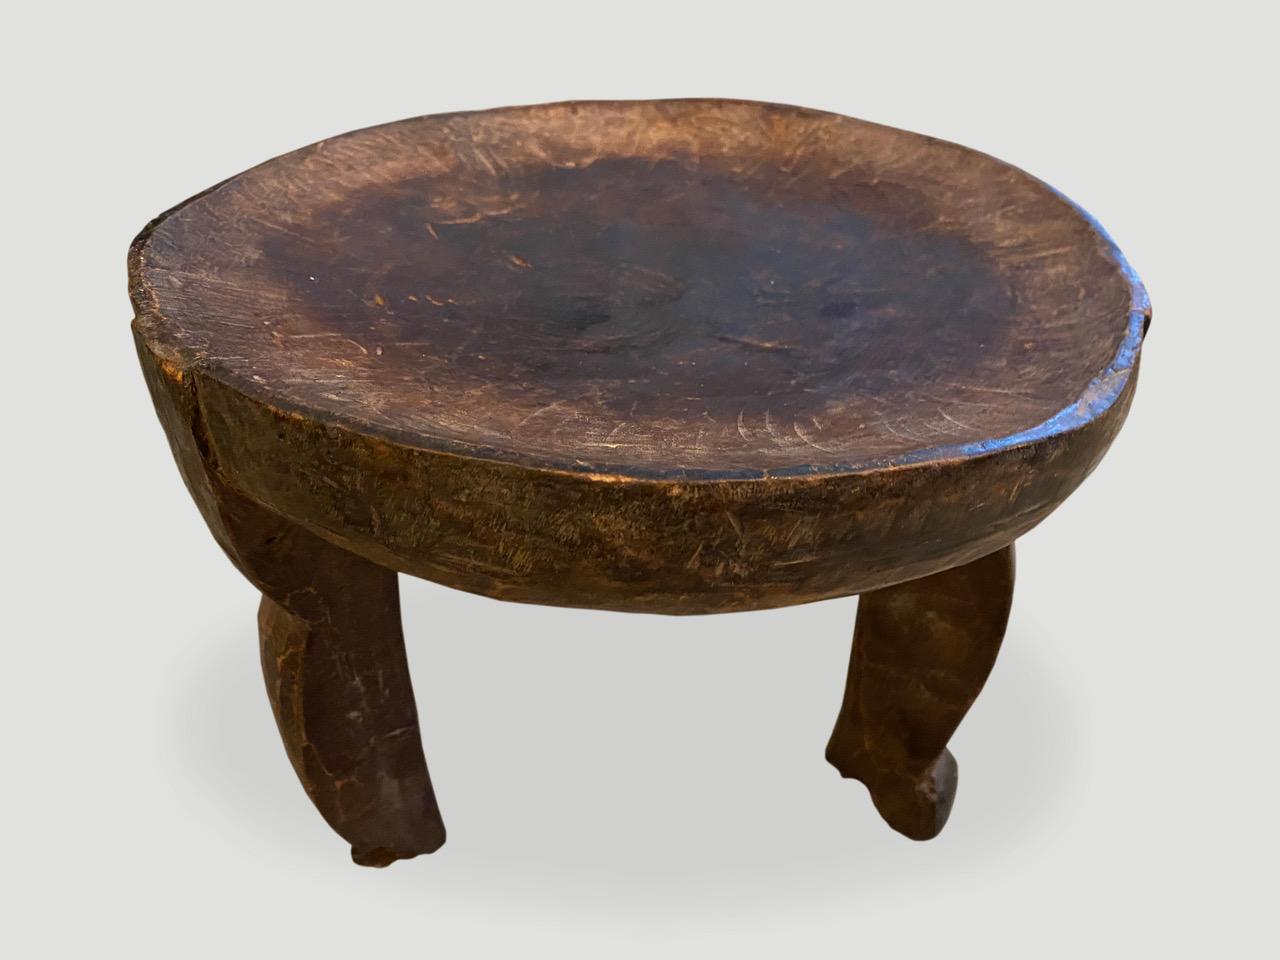 Beautiful hand carved African side table or stool with lovely patina. The entire piece is hand carved out of a single piece of mahogany wood.

This stool or side table was sourced in the spirit of wabi-sabi, a Japanese philosophy that beauty can